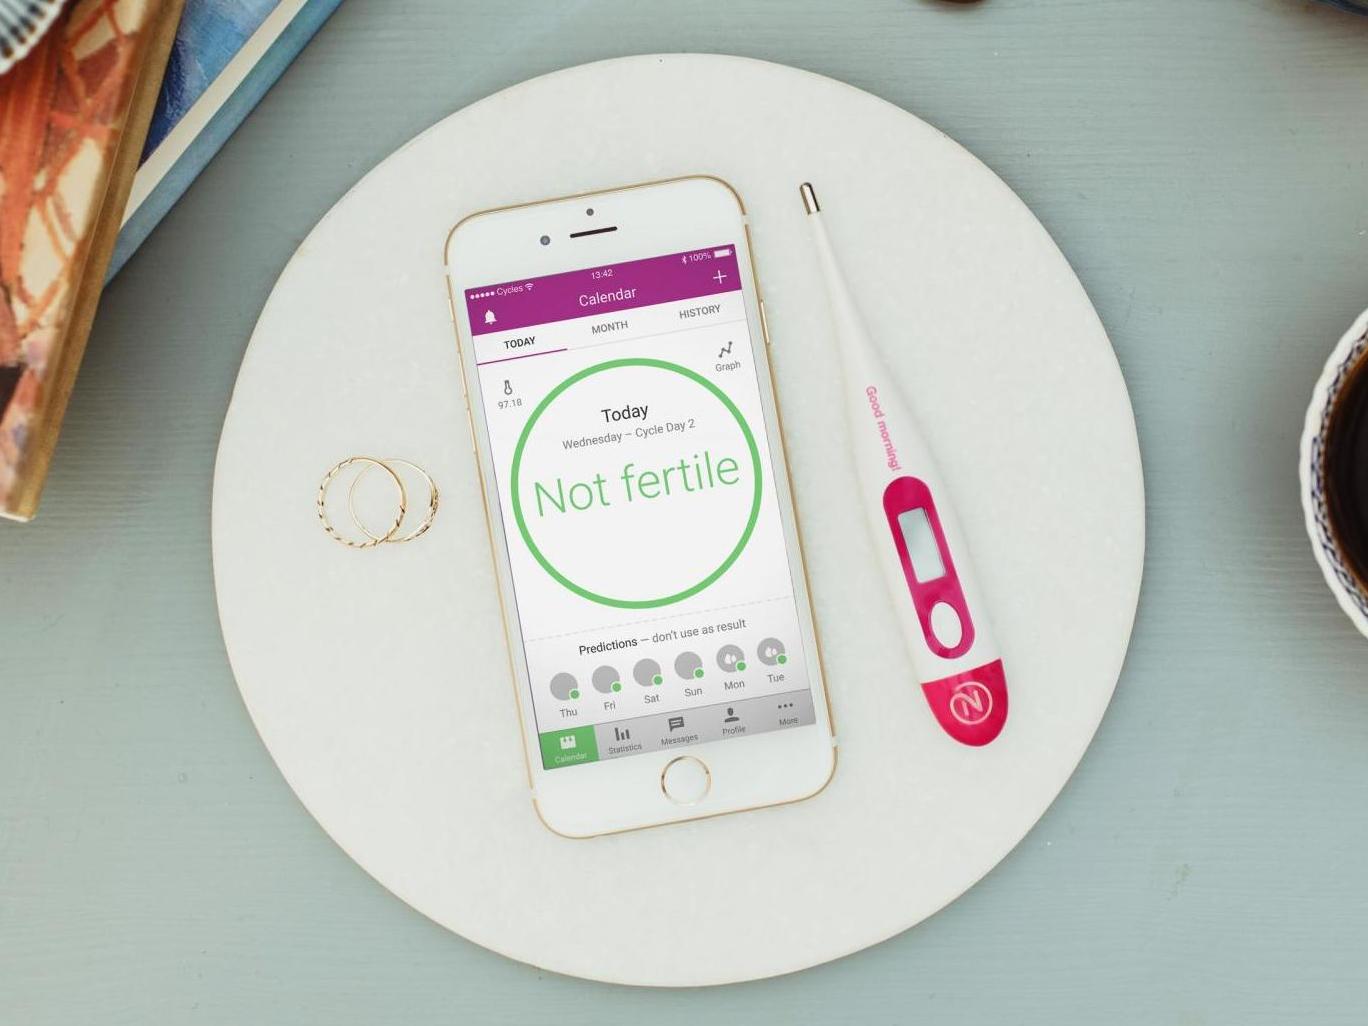 The Natural Cycles app has been officially approved by the FDA in the US